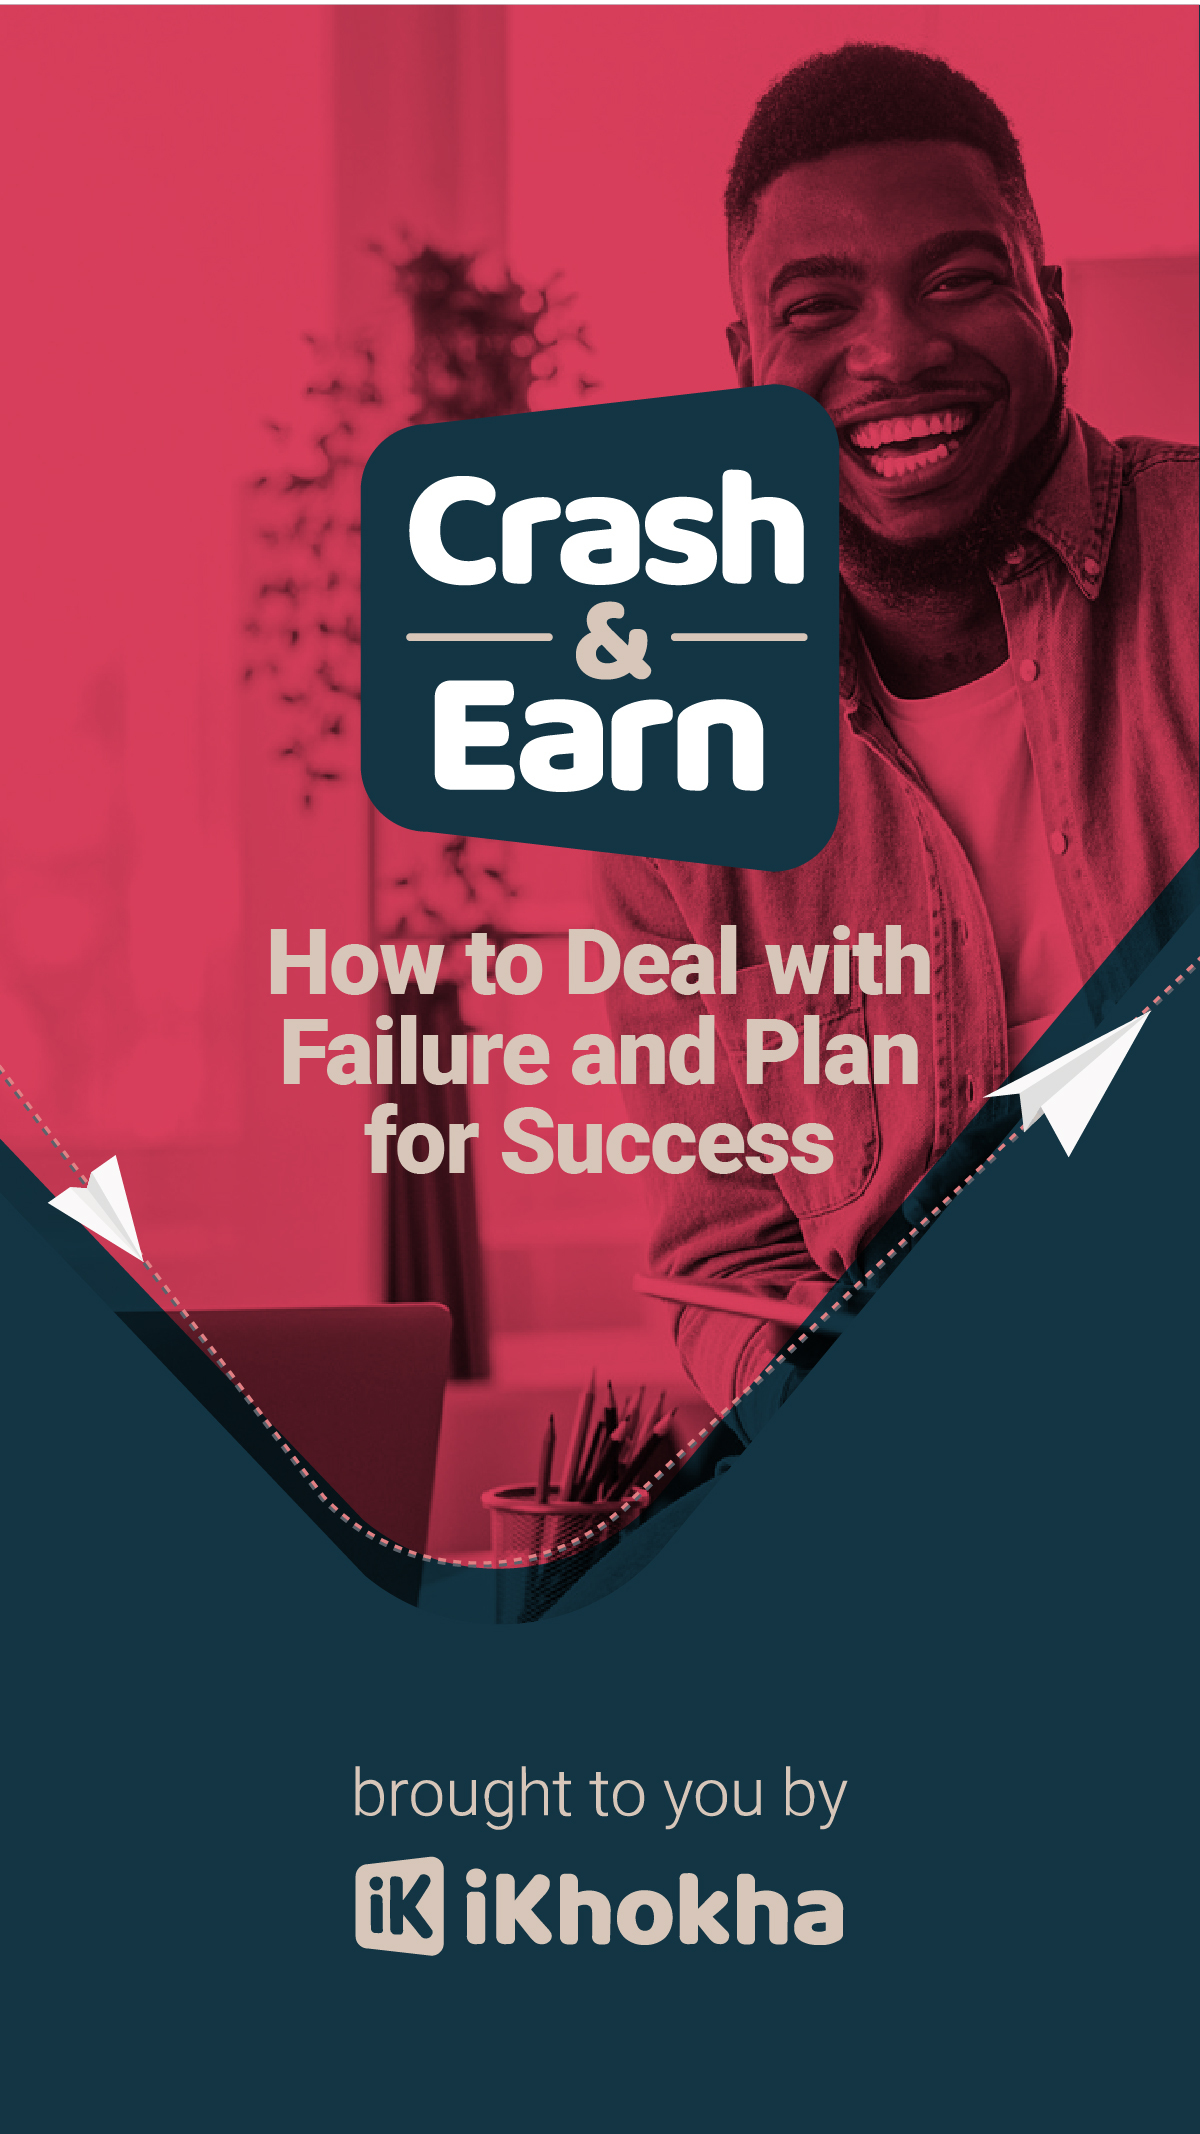 Crash & earn how to deal with failure and plan for success